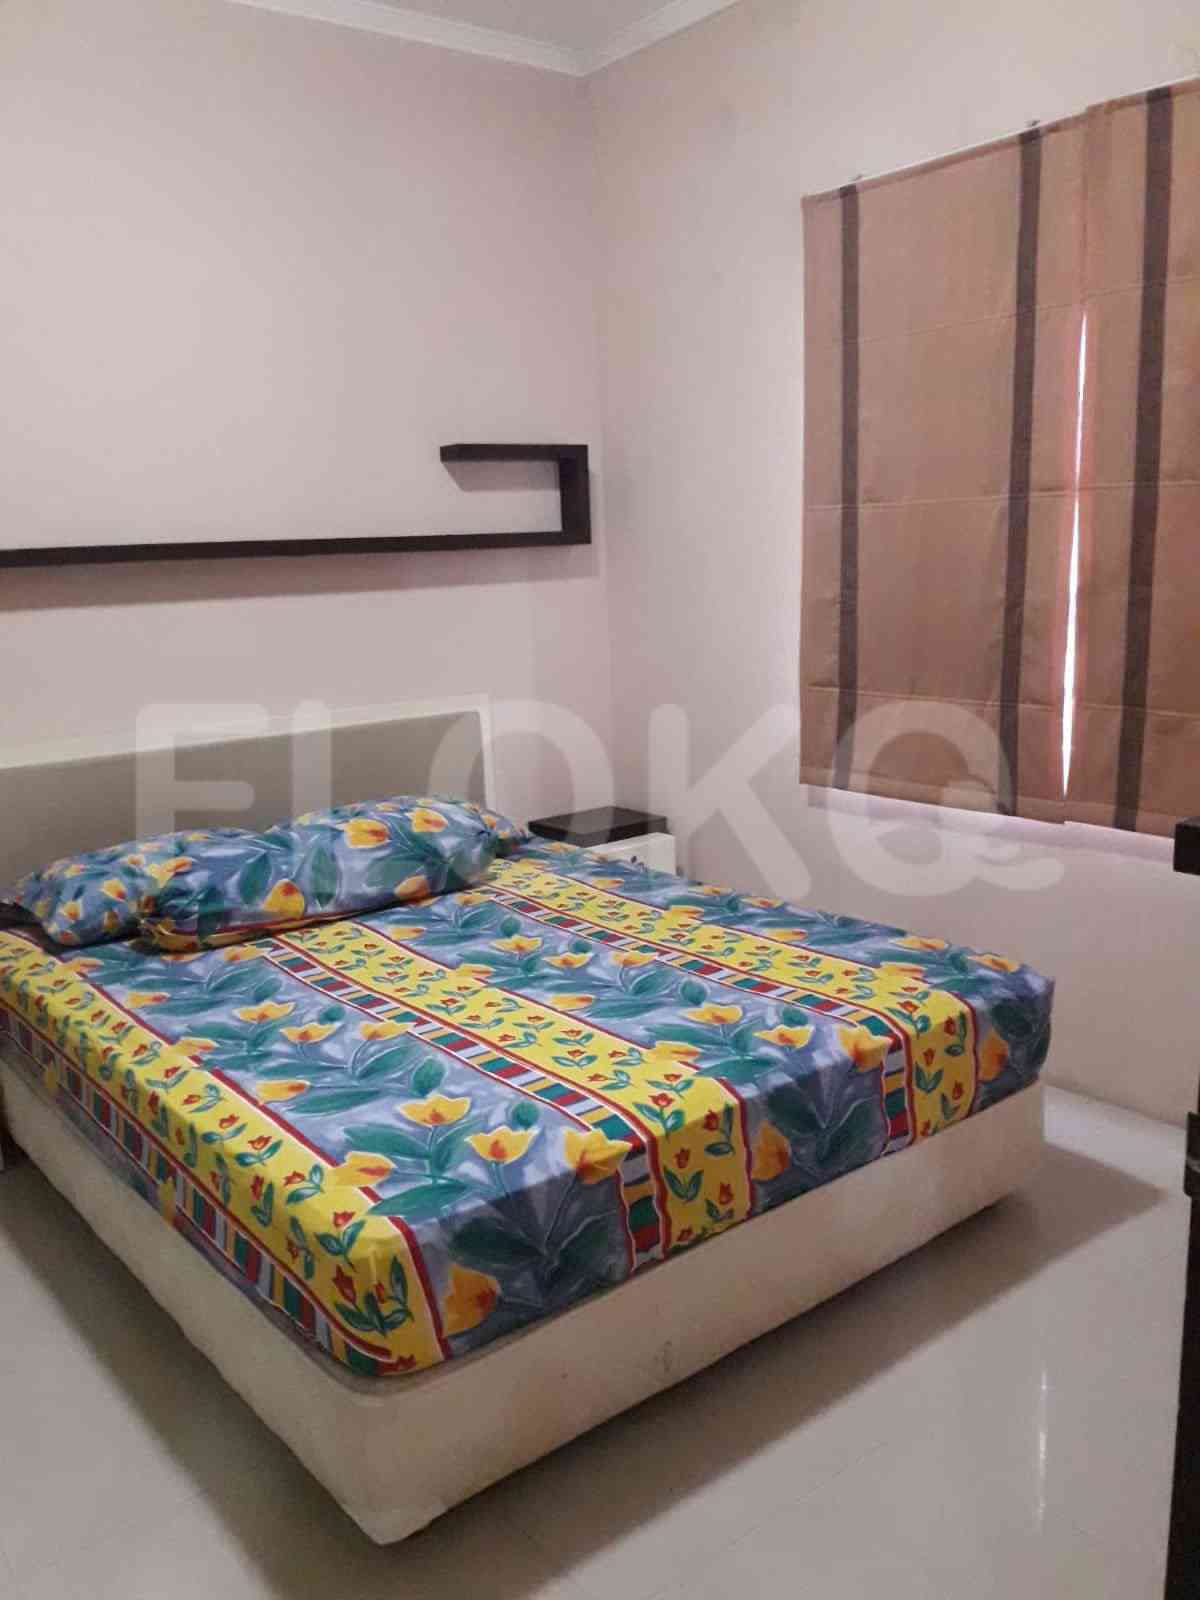 1 Bedroom on 23rd Floor for Rent in Sudirman Park Apartment - ftac77 1